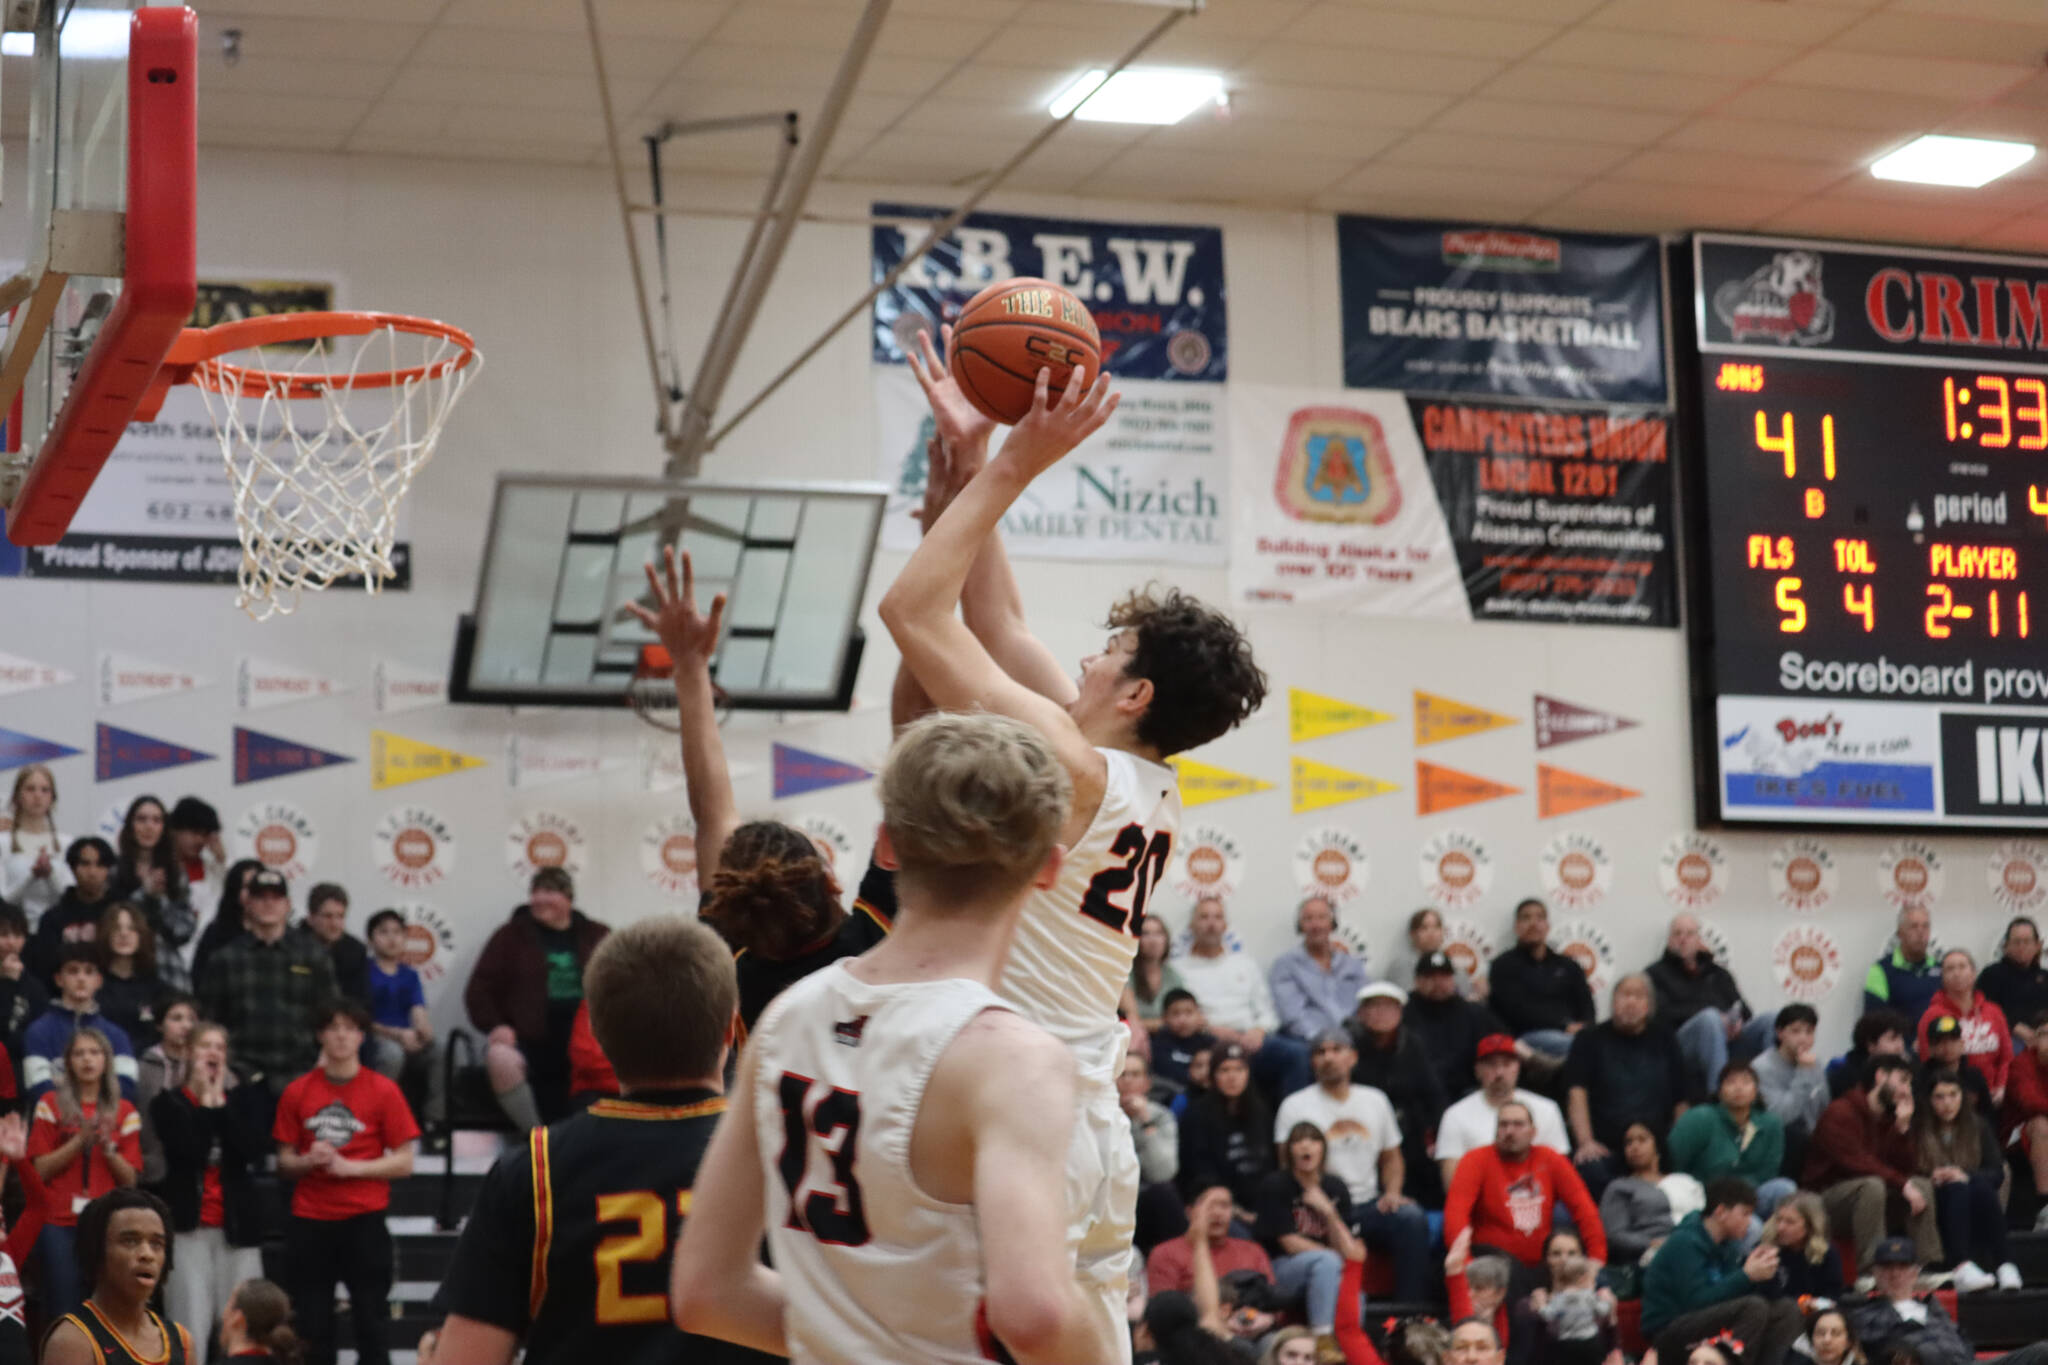 JDHS senior forward Orion Dybdahl comes in for a two-point shot during Friday’s Capital City Classic against West Valley High School. Dybdahl would end the game with a total of eight points. (Jonson Kuhn / Juneau Empire)